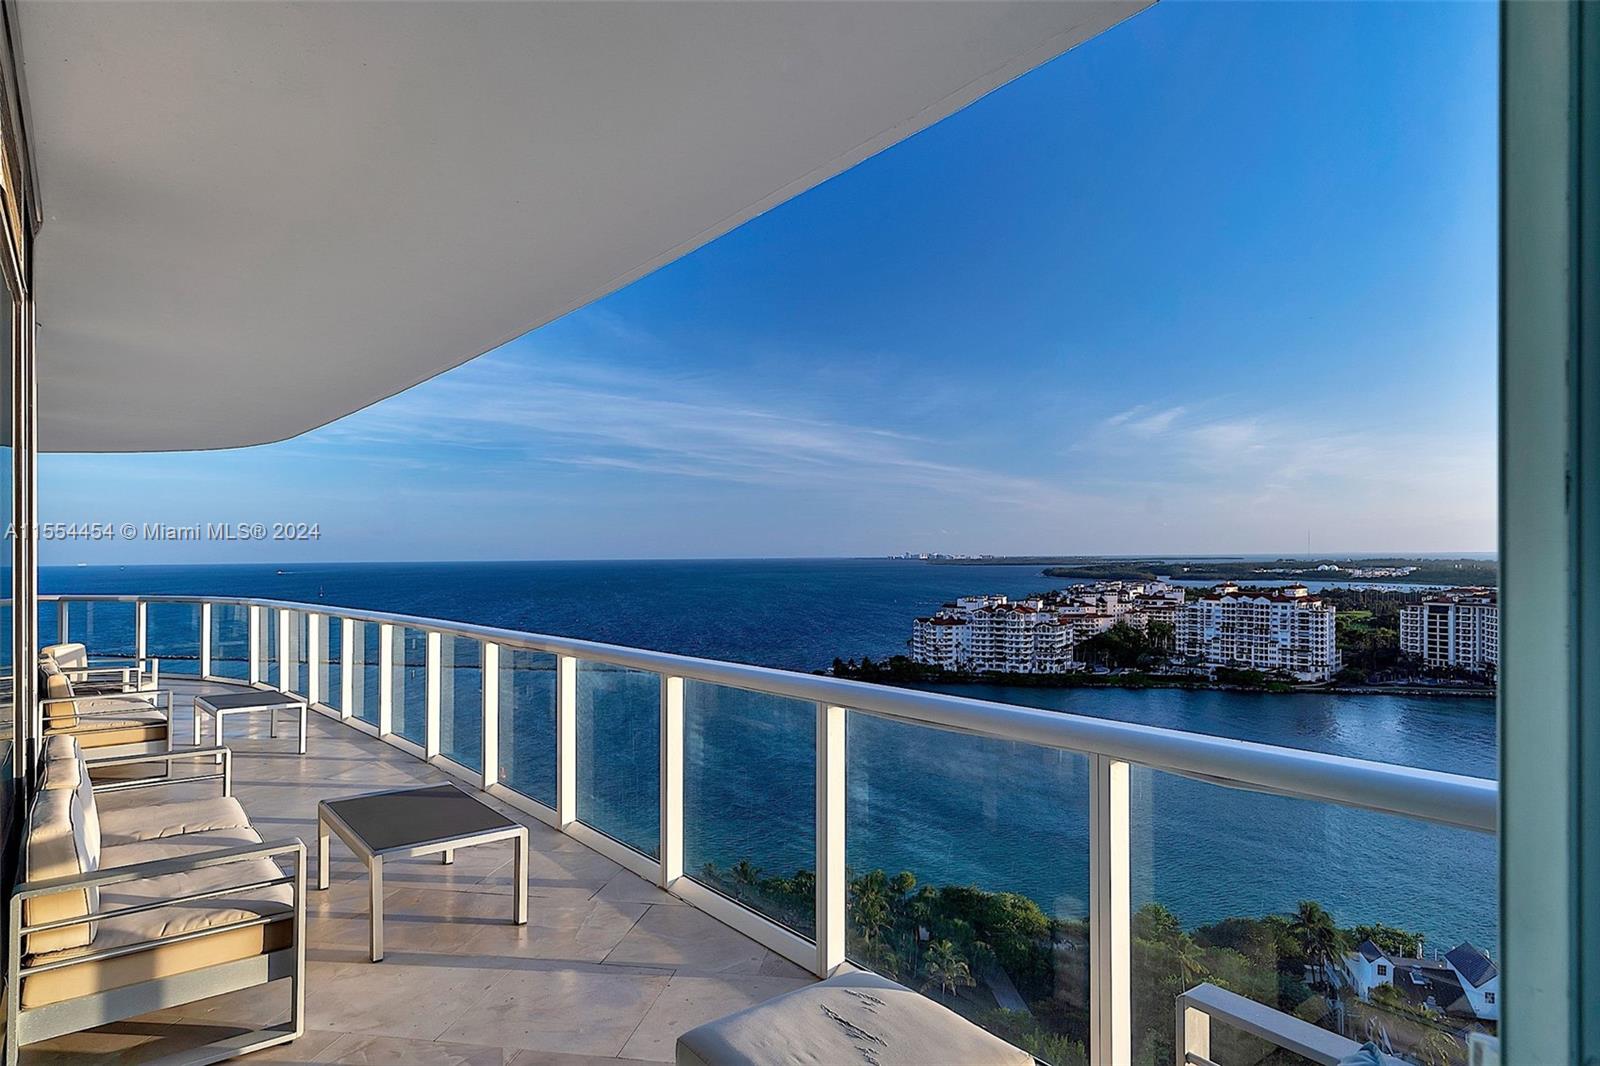 Available June 3rd for 4 - 6 months: This spectacular corner unit in Continuum South Tower offers panoramic water views from city to ocean; including a view over Fisher Island and down Florida’s Southern coastline. Renters will enjoy a spacious open floor-plan with gourmet kitchen, expansive master suite and all of the comforts of home. Continuum is the only gated community in South Beach, offering 12 manicured acres of waterfront property, an outdoor restaurant, three story health and fitness center, two resort-style pools, three har tru tennis courts and much more. Call listing agent for details!